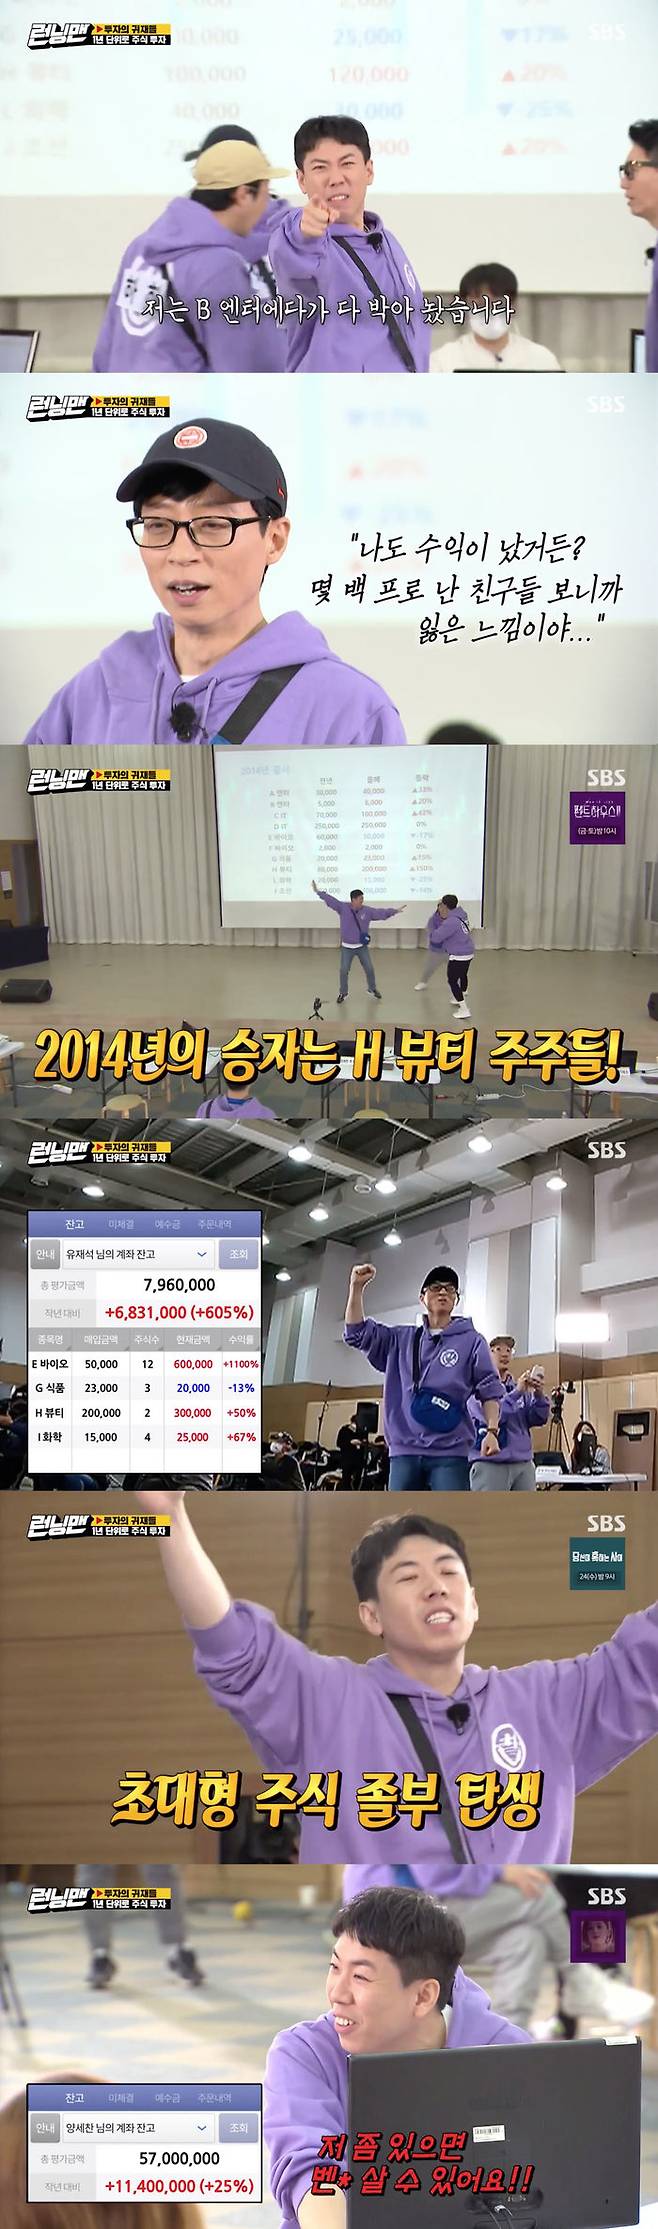 Yang Se-chan has become an icon of Young and Rich.On SBS Running Man broadcasted on the 21st, Investments precious Race was held.On this day, the 2021 Running Investment Competition was held to select Running Mans best Share Investment.Each person will have a capital run money of 500,000 won and invest in the desired stocks, and the first and second places with the largest amount will be given the goods and the last penalty will be carried out.In particular, this simulation investment competition was conducted by adapting the graphs of the events that existed in 2011 to 2020.The price of each Share was set by the production team at a random price, and it was necessary to predict the stock price as a social issue of the actual year and to invest.The company predicted the stock price that changed every year and invested it, and the person with the most assets won 10 years later. The point obtained from the mission before Investment was able to purchase stock information on the information exchange and use it for investment.The biggest beneficiary of 2011 was Yang Se-chan; he believed in Ji Suk-jins false information and invested it, but this was a huge Revenue.Yang Se-chan surprised everyone with 540% of Revenge.On the other hand, Song Ji-hyo, who does not know Share at all, lost a third and was saddened.Yoo Jae-Suk of 59 percent Revenue said: Share is a stomachache, it hurts to see a man doing well, it hurts relatively.I also feel like I lost my friends who have been in the Revenue but a few hundred pros. It was also a soloist of Yang Se-chan in 2012.He bought information about B-enter and quickly sold B-enter Share and invested in IT Share, knowing that the share price was falling.And he told Jeon So-min and Lee Kwang-soo to shed false information and go further to B-Enter.Yang Se-chan earned a lot and Jeon So-min and Lee Kwang-soo lost a lot.In the 2013 Share market, Yang Se-chan invested in Beauty after agonizing.And one day, Beautys stock will rise, Jonber Han Kim Jong-kook did in 2013.And Ji Suk-jin, who held the HBeauty state for two years, sold it and all-in to Enter; their investments resulted in conflicting results.The surge in Beauty State has sent Kim Jong-kook and Yang Se-chan excited, while Ji Suk-jin has gone into a rage.I was Young and Rich, said Yang Se-chan, who posted a huge Revenge. Ill buy you a car, coach.In the next Share market, Yang Se-chan got information about FVaio and all-in to FVaio.And for Lee Kwang-soo, he encouraged EVaio to buy, so Lee Kwang-soo believed him and all-in to EVaio.When the stock price was released in 2015, Lee Kwang-soo cheered: E Vaio was beaten to 110%, and F Vaio rose 500%.So the Revenue gold of Ji Suk-jin, who was all in Vaio, soared.As the Investment competition continued, Song Ji-hyo complained of difficulties.Yoo Jae-Suk said, Ji Hyo says that he does not seem to fit Share. Song Ji-hyo laughed, saying, I will work and make money.In 2015, in the Share market, Jeon So-min was invested in the wrong week because he did not understand it even though he got information about food stocks.But when he heard his information, Ji Suk-jin invested in food stocks; and Lee Kwang-soo survived EVaio with EVaio Phase I information.However, Yang Se-chan, who gained information about the Vaio share price decline, sold all of Vaio shares and all-in to food; as a result, EVaio fell 50 percent.G food rose 25%, and Yang Se-chan got avenue again.In particular, Yang Se-chan has been impressed by the tremendous Revenge from 500,000 won to 57 million won without losing it once after the opening of the Share market in 2011.Yang Se-chan said, Now I can buy a Mercedes in a little longer. My brothers envied, I am a real man, Warren Buffett.